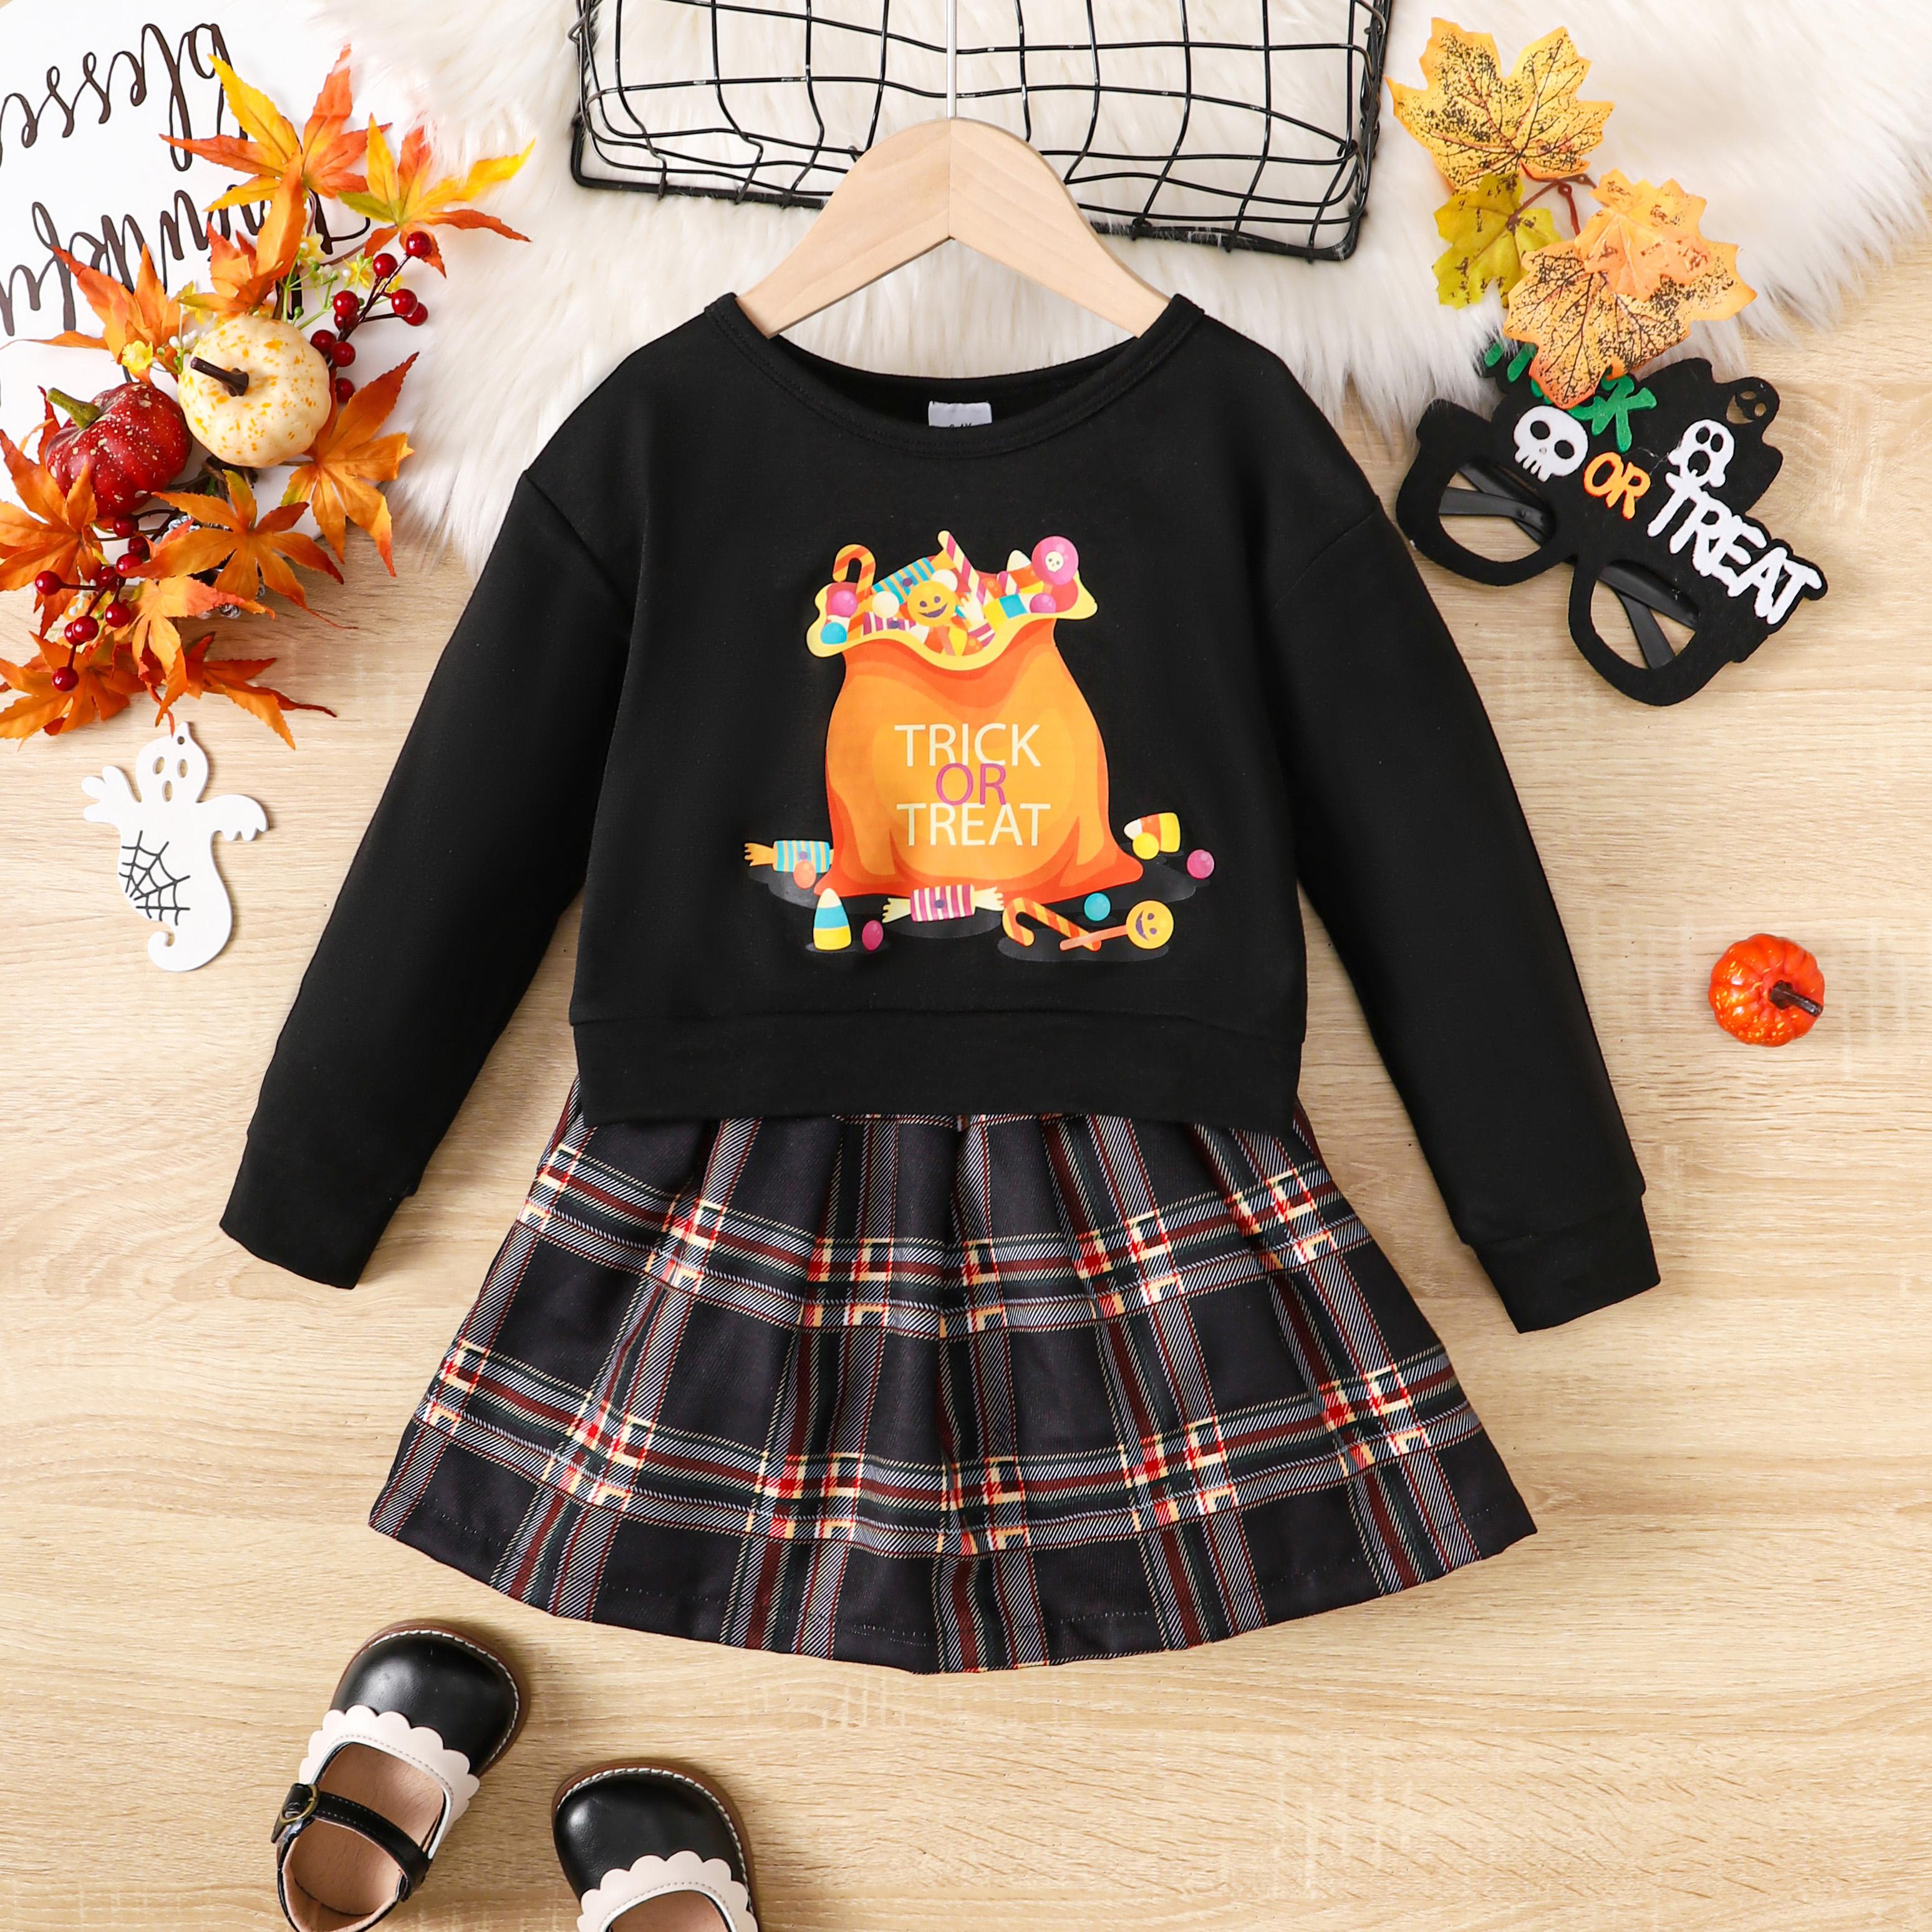 3-8Y Ready Stock Kids Girls Halloween Outfits Skirt Sets "TRICK OR TREAT" Letter Graphics Candy Print Long Sleeve Tops Plaid Pleated Skirts 2Pcs Clothing Black Catpapa 462307158